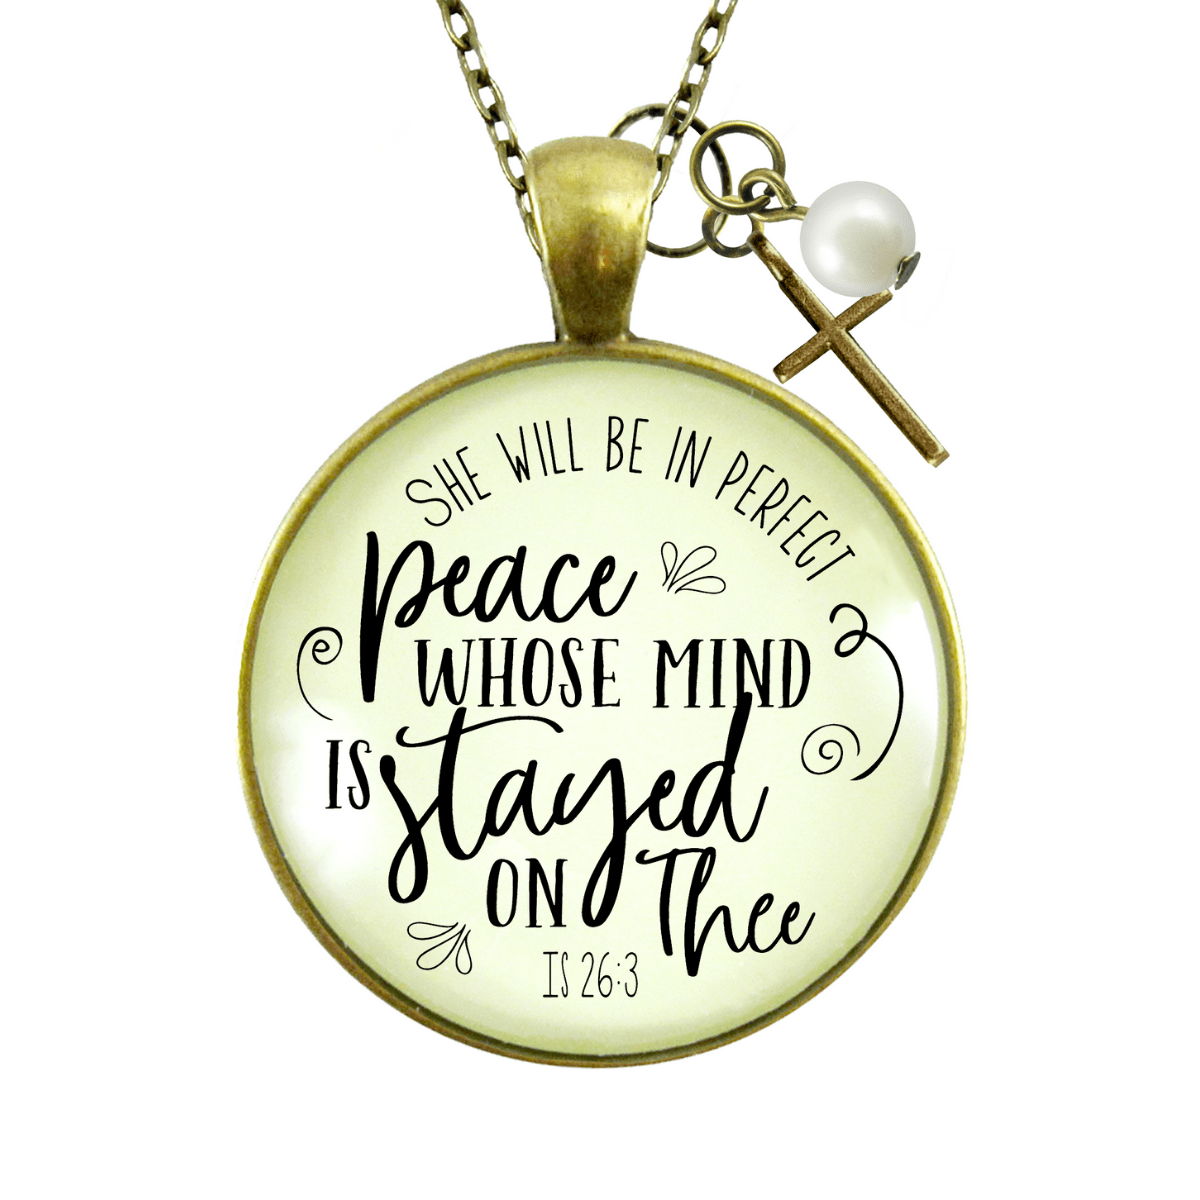 Gutsy Goodness Peaceful Necklace She Will Perfect Peace Faith Verse Jewelry - Gutsy Goodness Handmade Jewelry;Peaceful Necklace She Will Perfect Peace Faith Verse Jewelry - Gutsy Goodness Handmade Jewelry Gifts